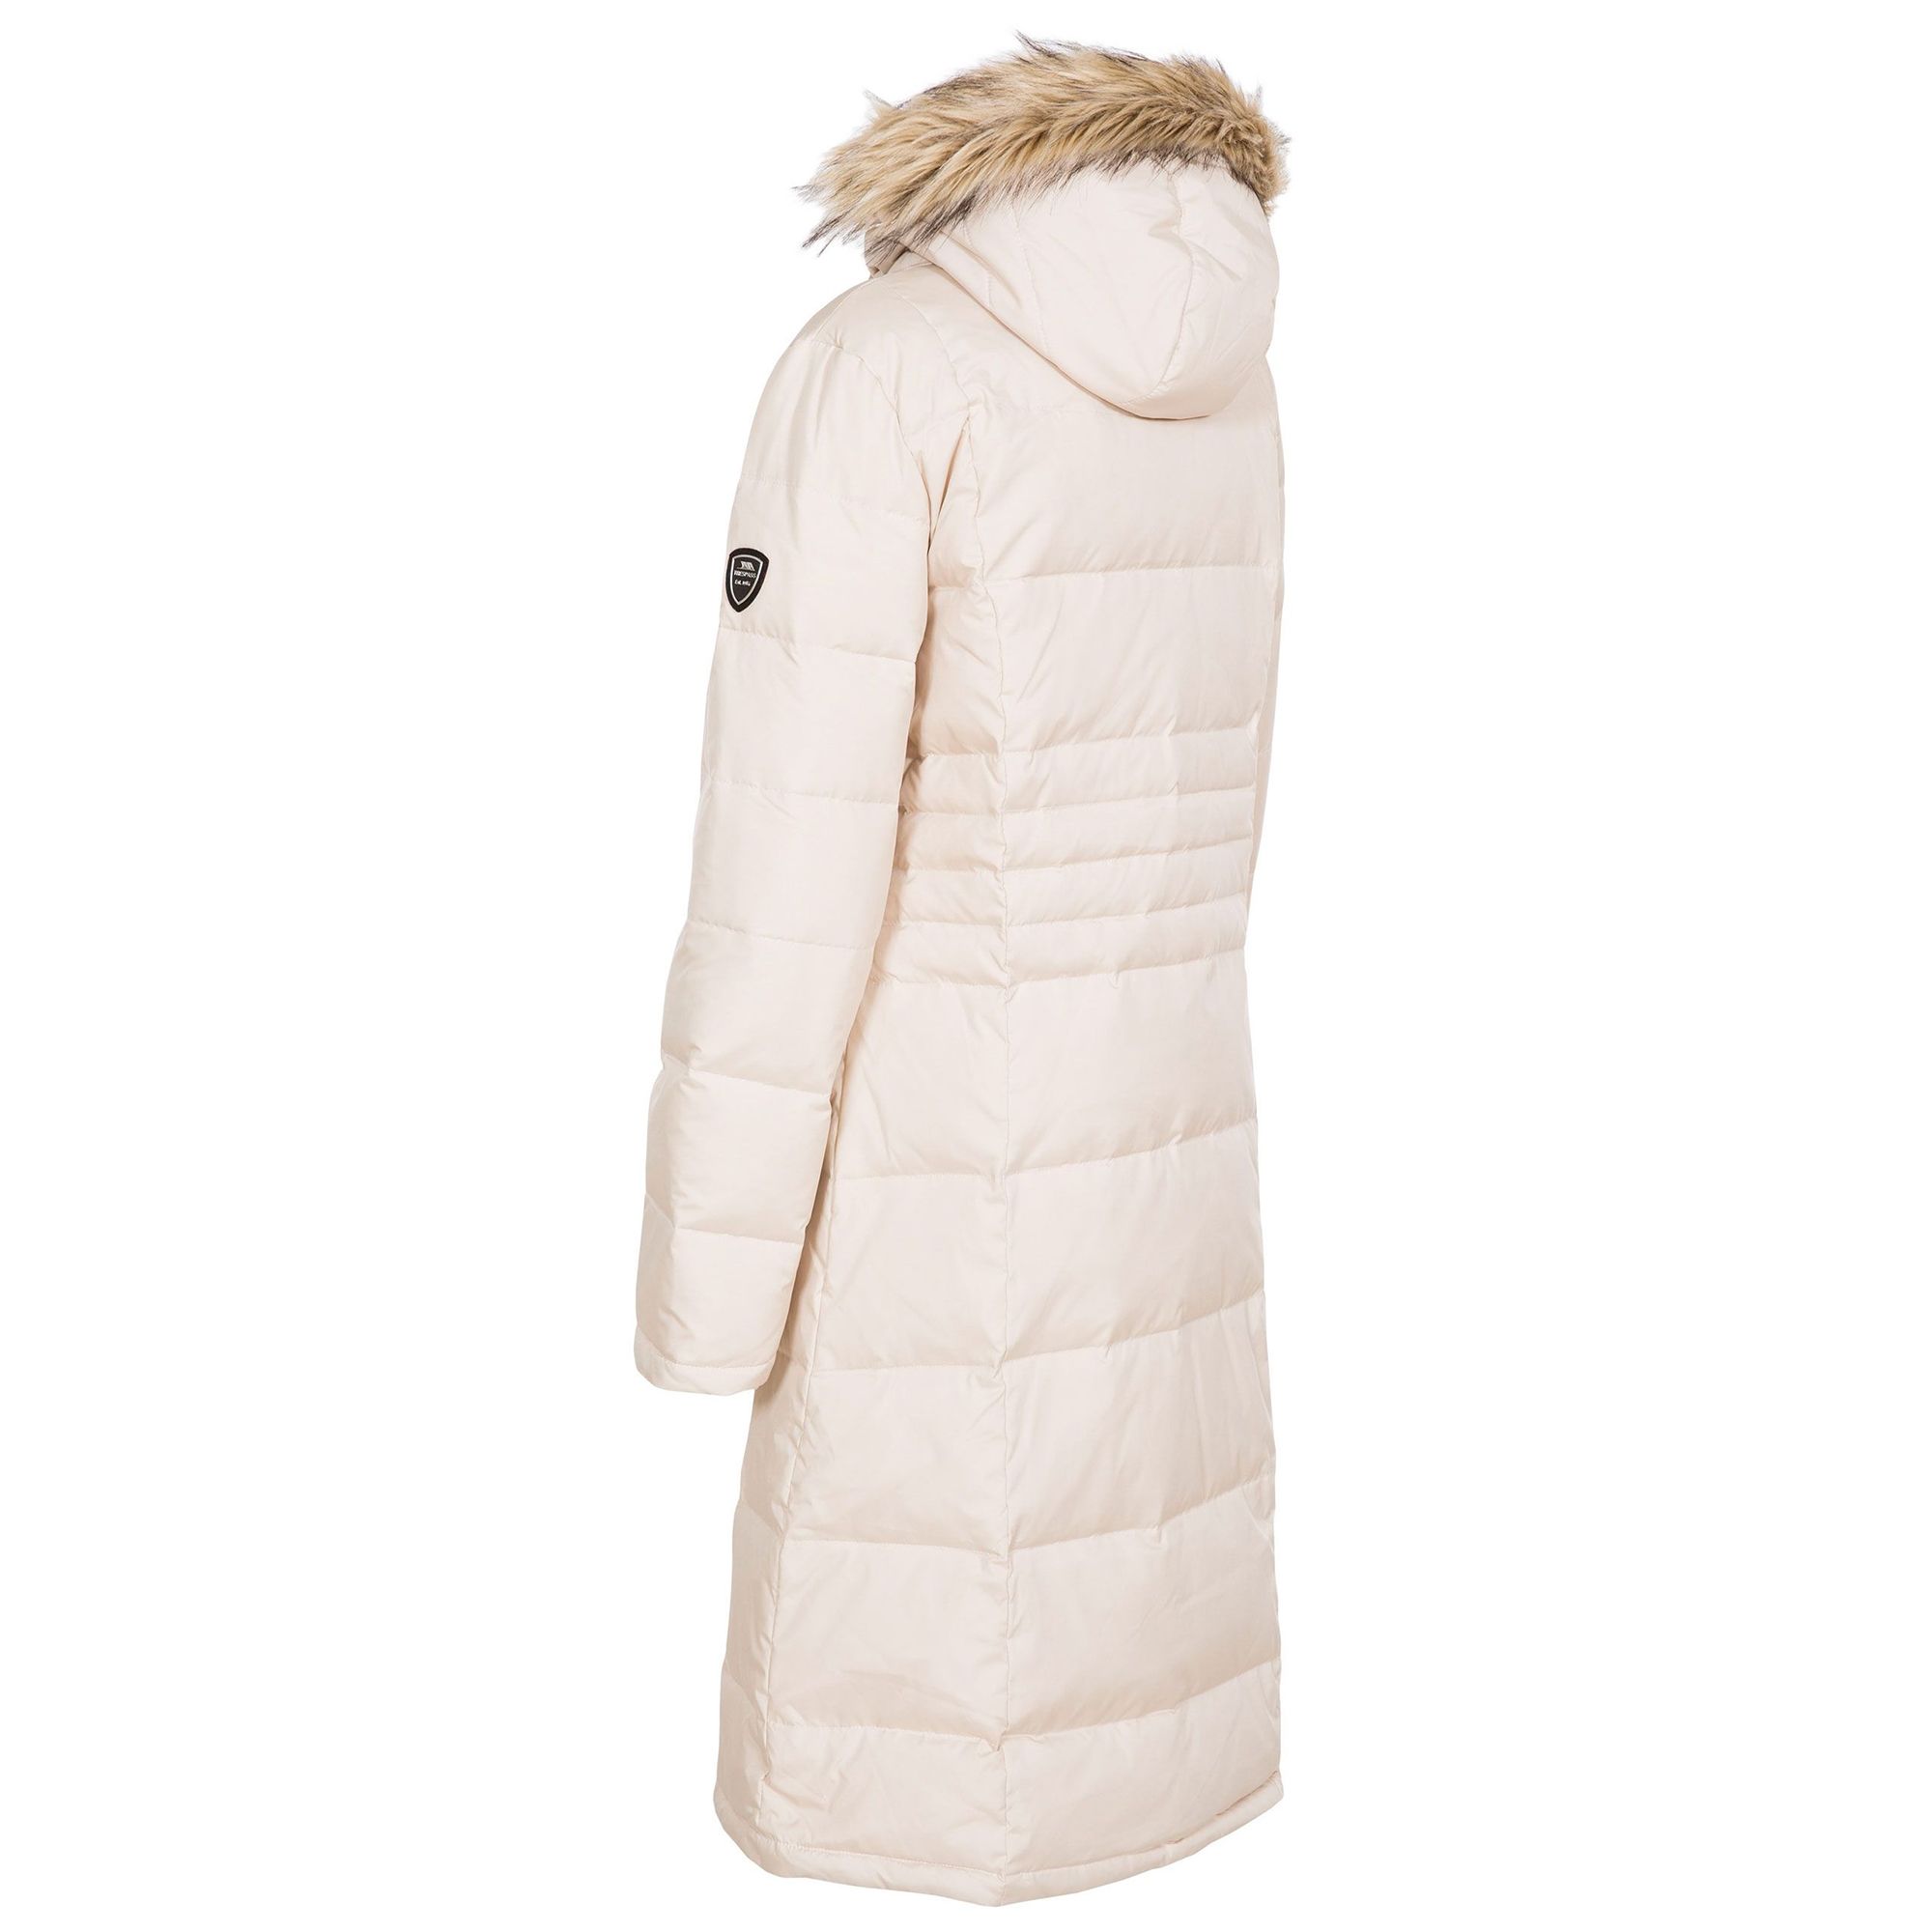 Adjustable zip off hood with faux fur trim. Longer length. Two way front zipper. Inner zipped pocket. Badge detail on sleeve. Shell: 100% Polyester downproof, Lining: 100% Polyester downproof, Filling: 50% Down/50% Feather. Trespass Womens Chest Sizing (approx): XS/8 - 32in/81cm, S/10 - 34in/86cm, M/12 - 36in/91.4cm, L/14 - 38in/96.5cm, XL/16 - 40in/101.5cm, XXL/18 - 42in/106.5cm.